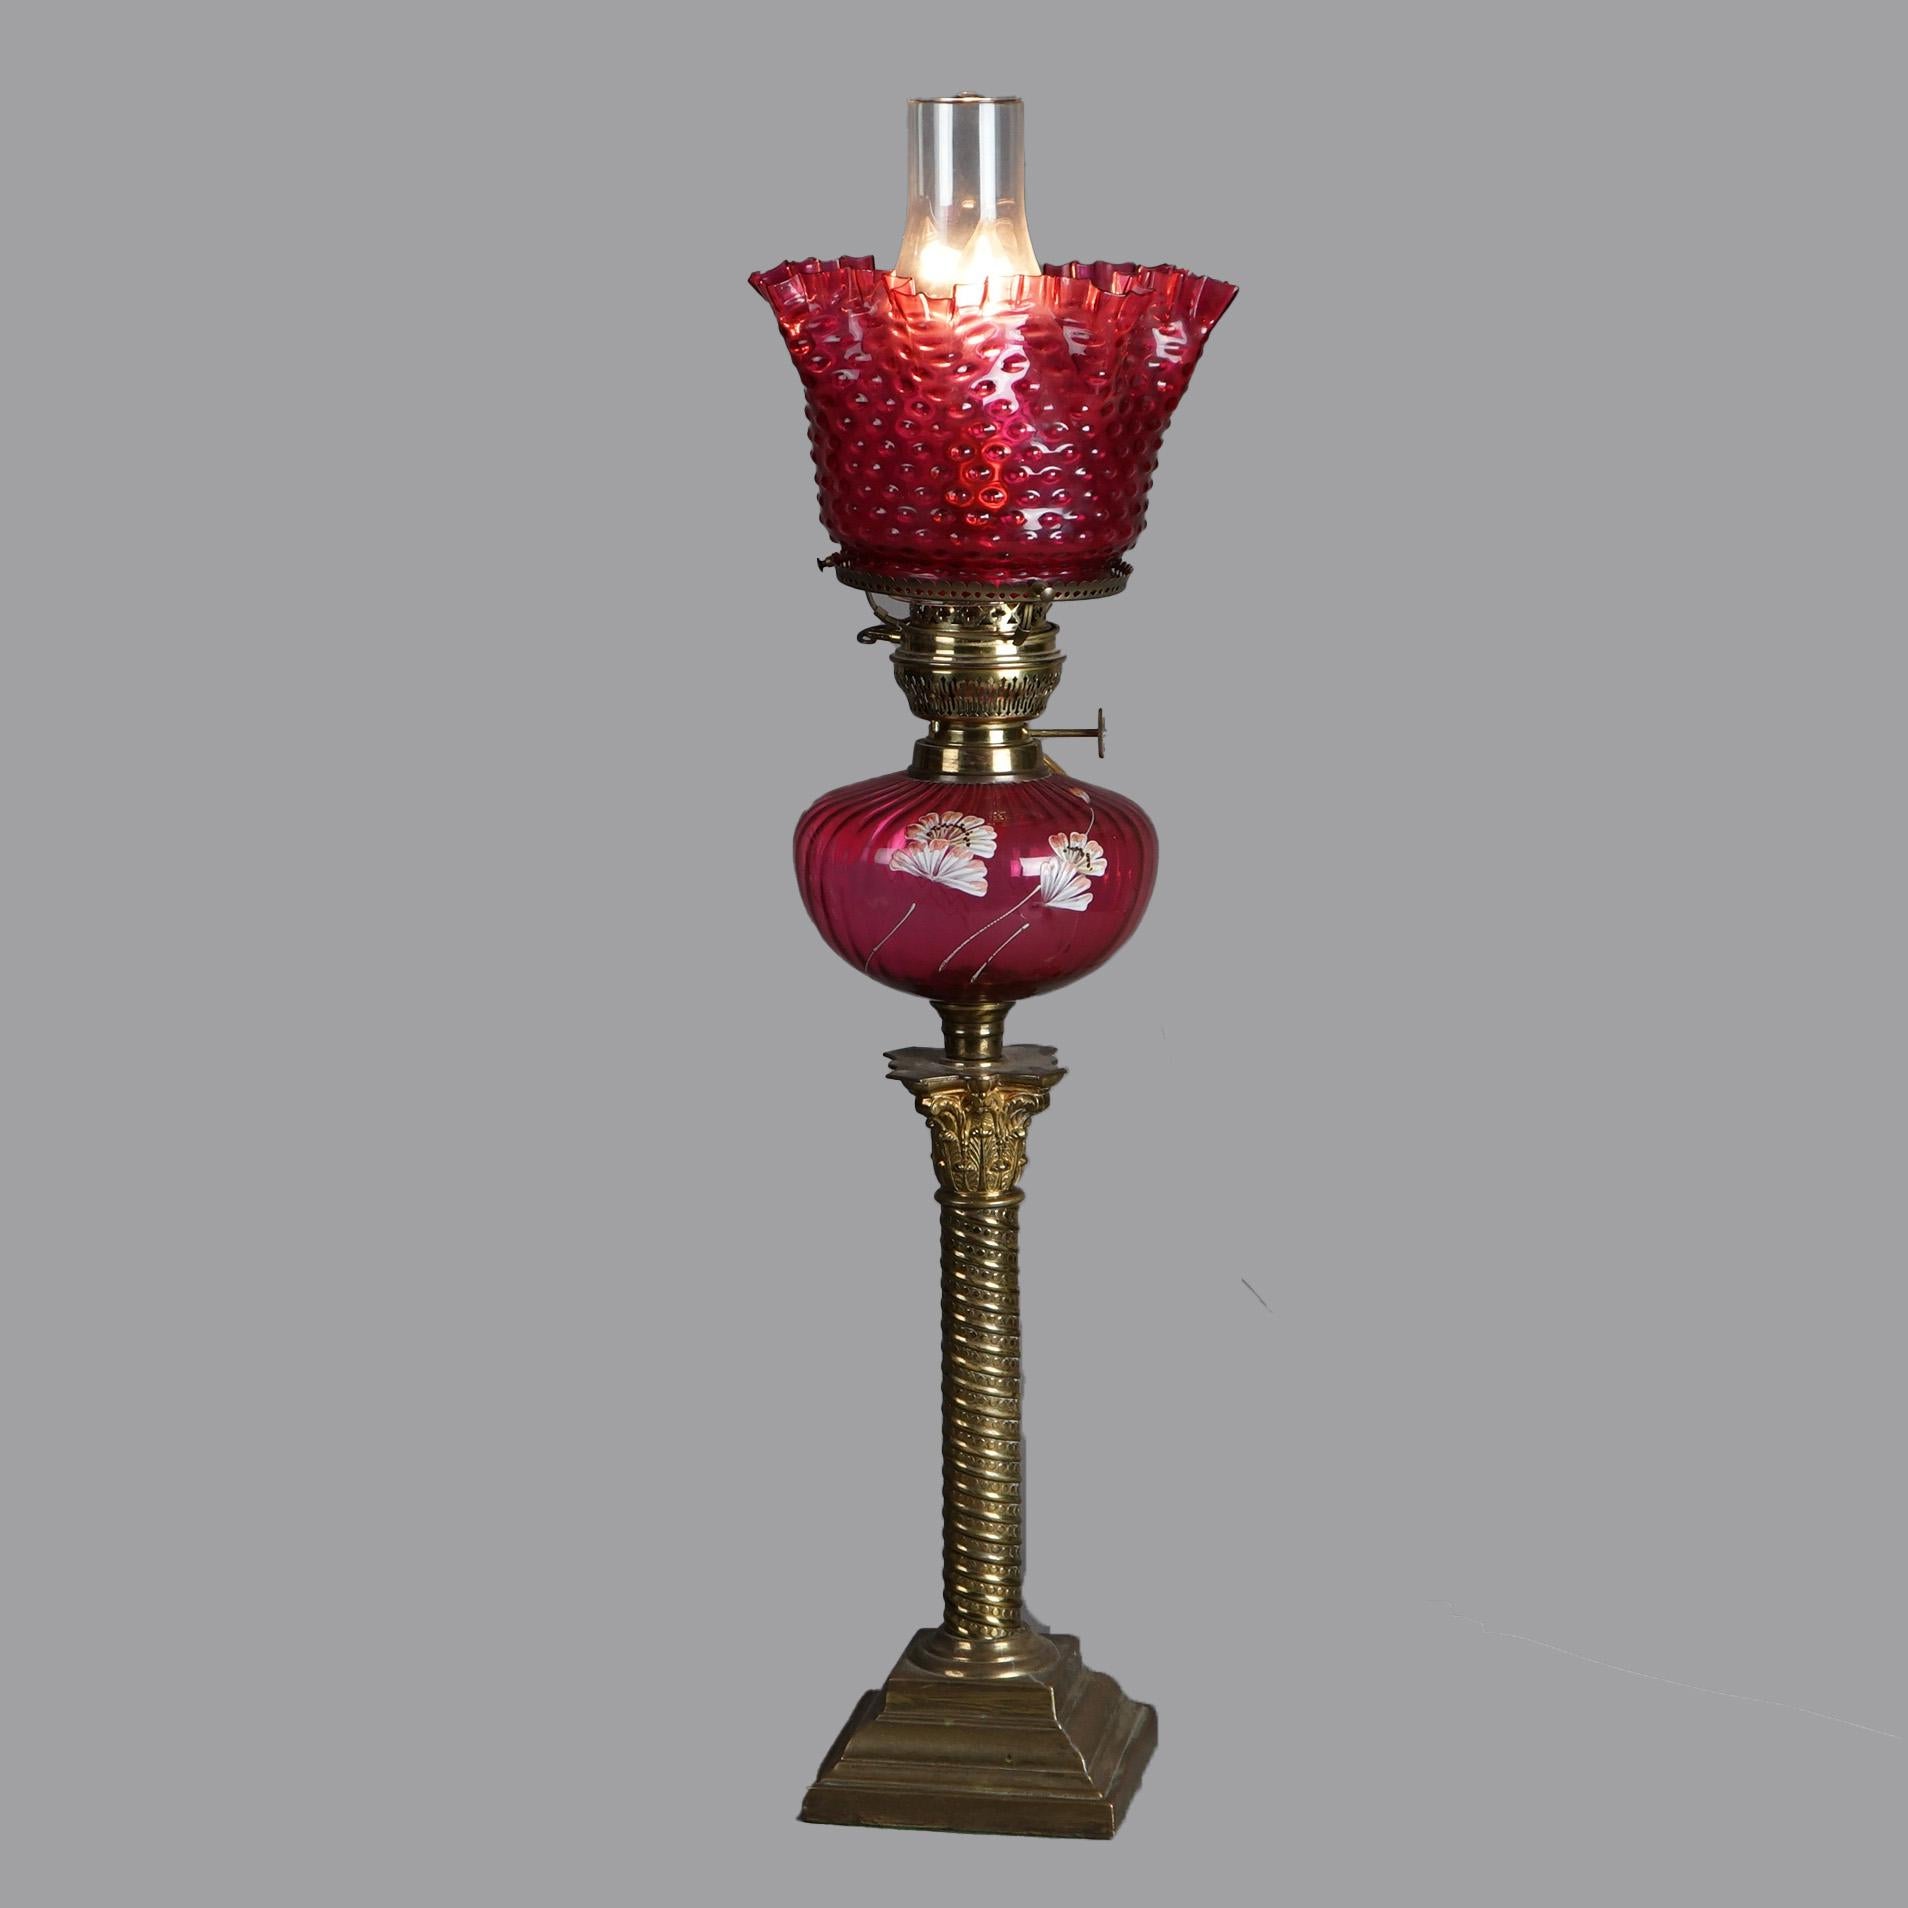 American Antique Victorian Cranberry Glass & Brass Banquet Lamp C1890 For Sale